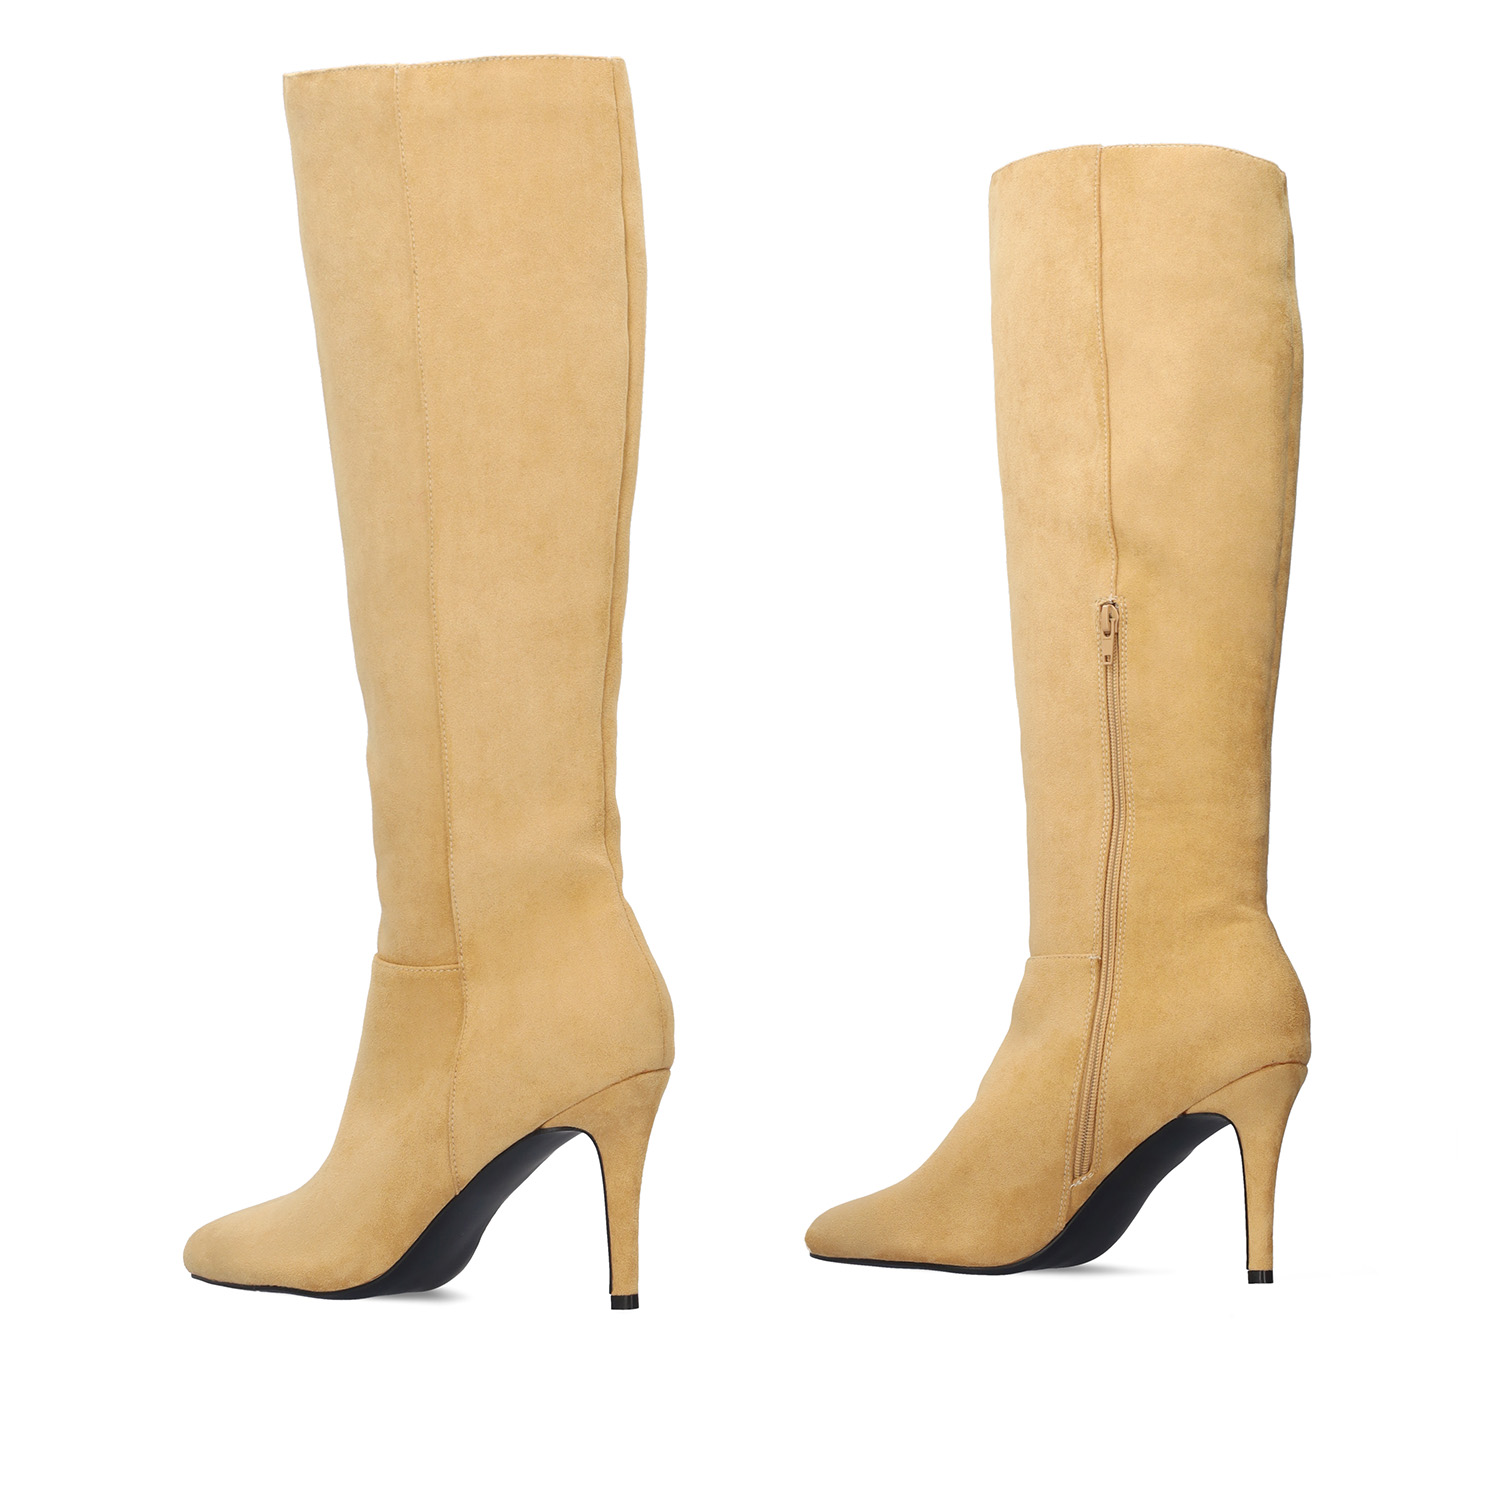 High-Calf boots in beige faux suede 